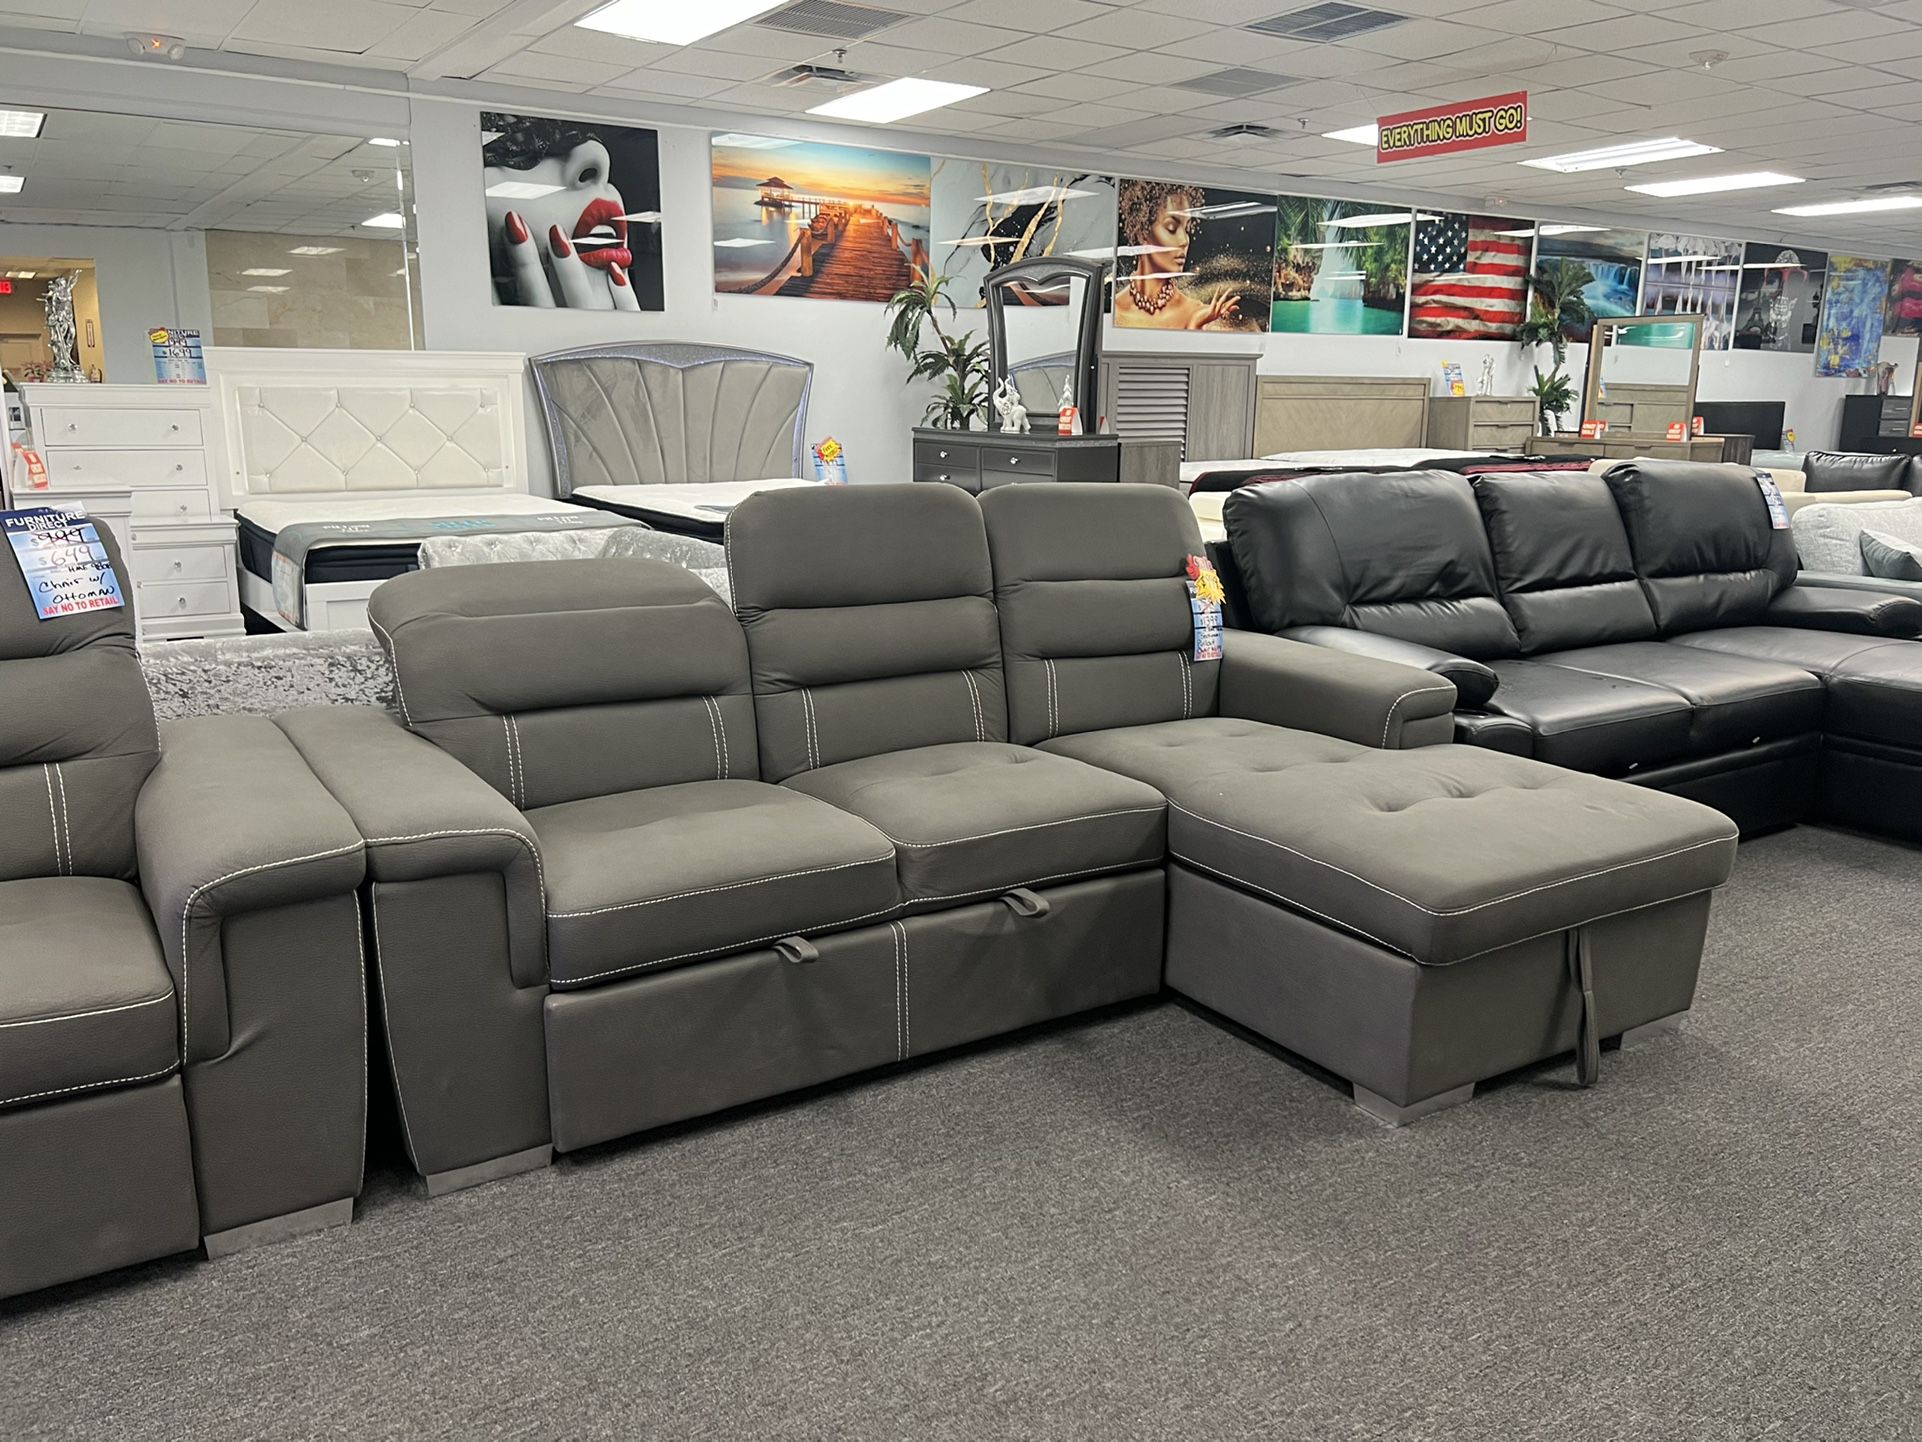 Beautiful Pull Out Sleeper Sectional On Sale For $899